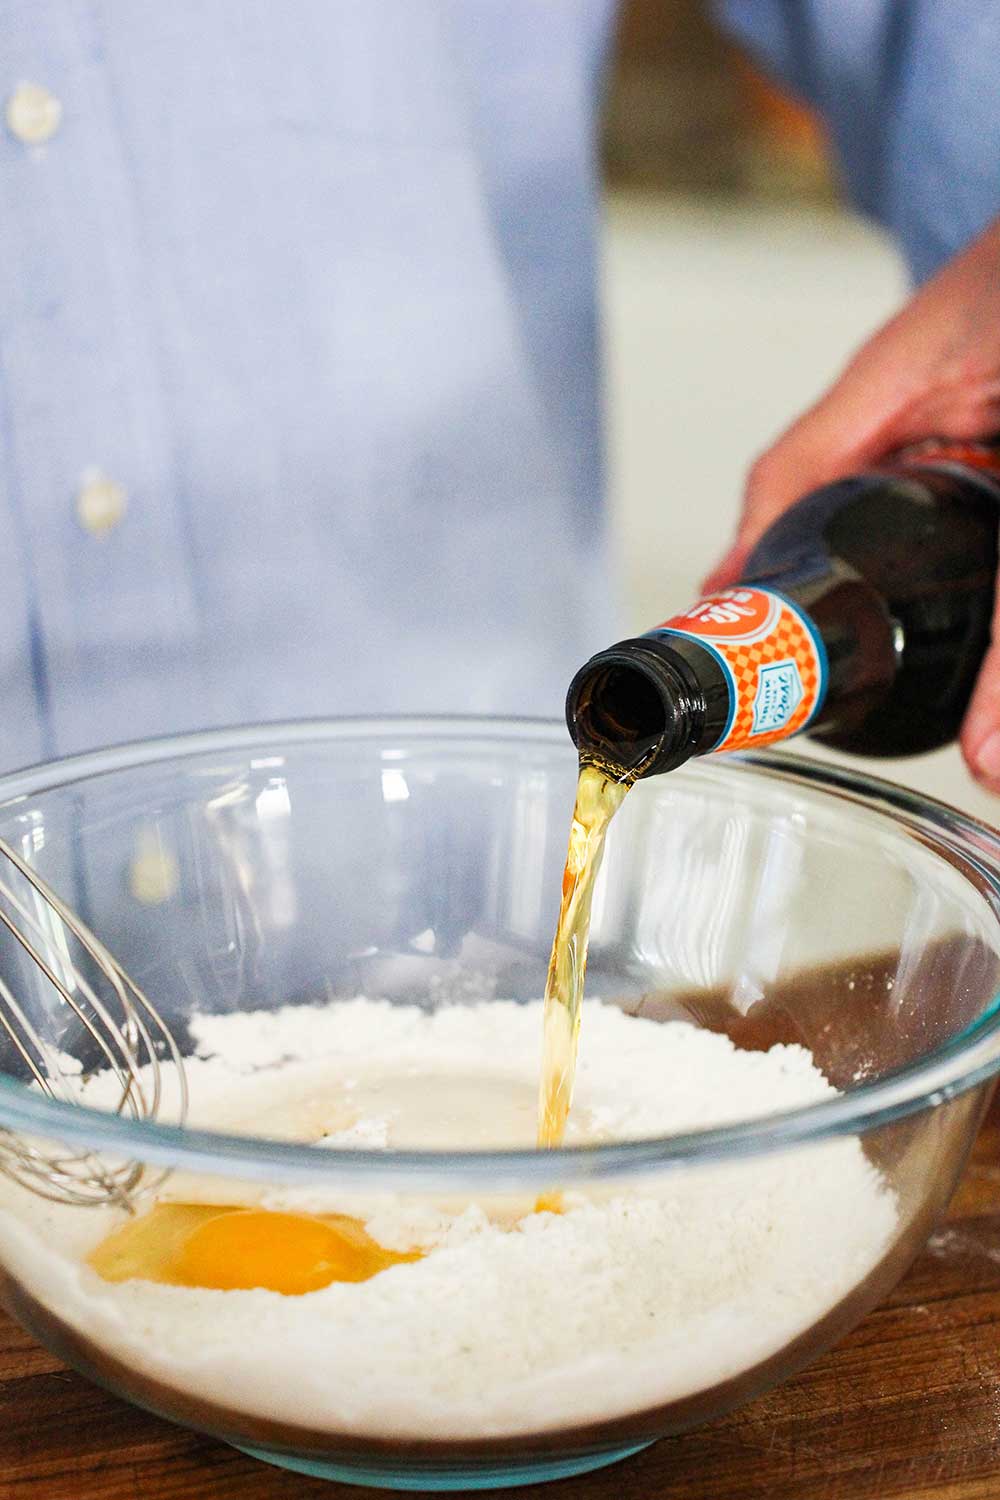 A bottle of beer being poured into a batter for fried fish. 